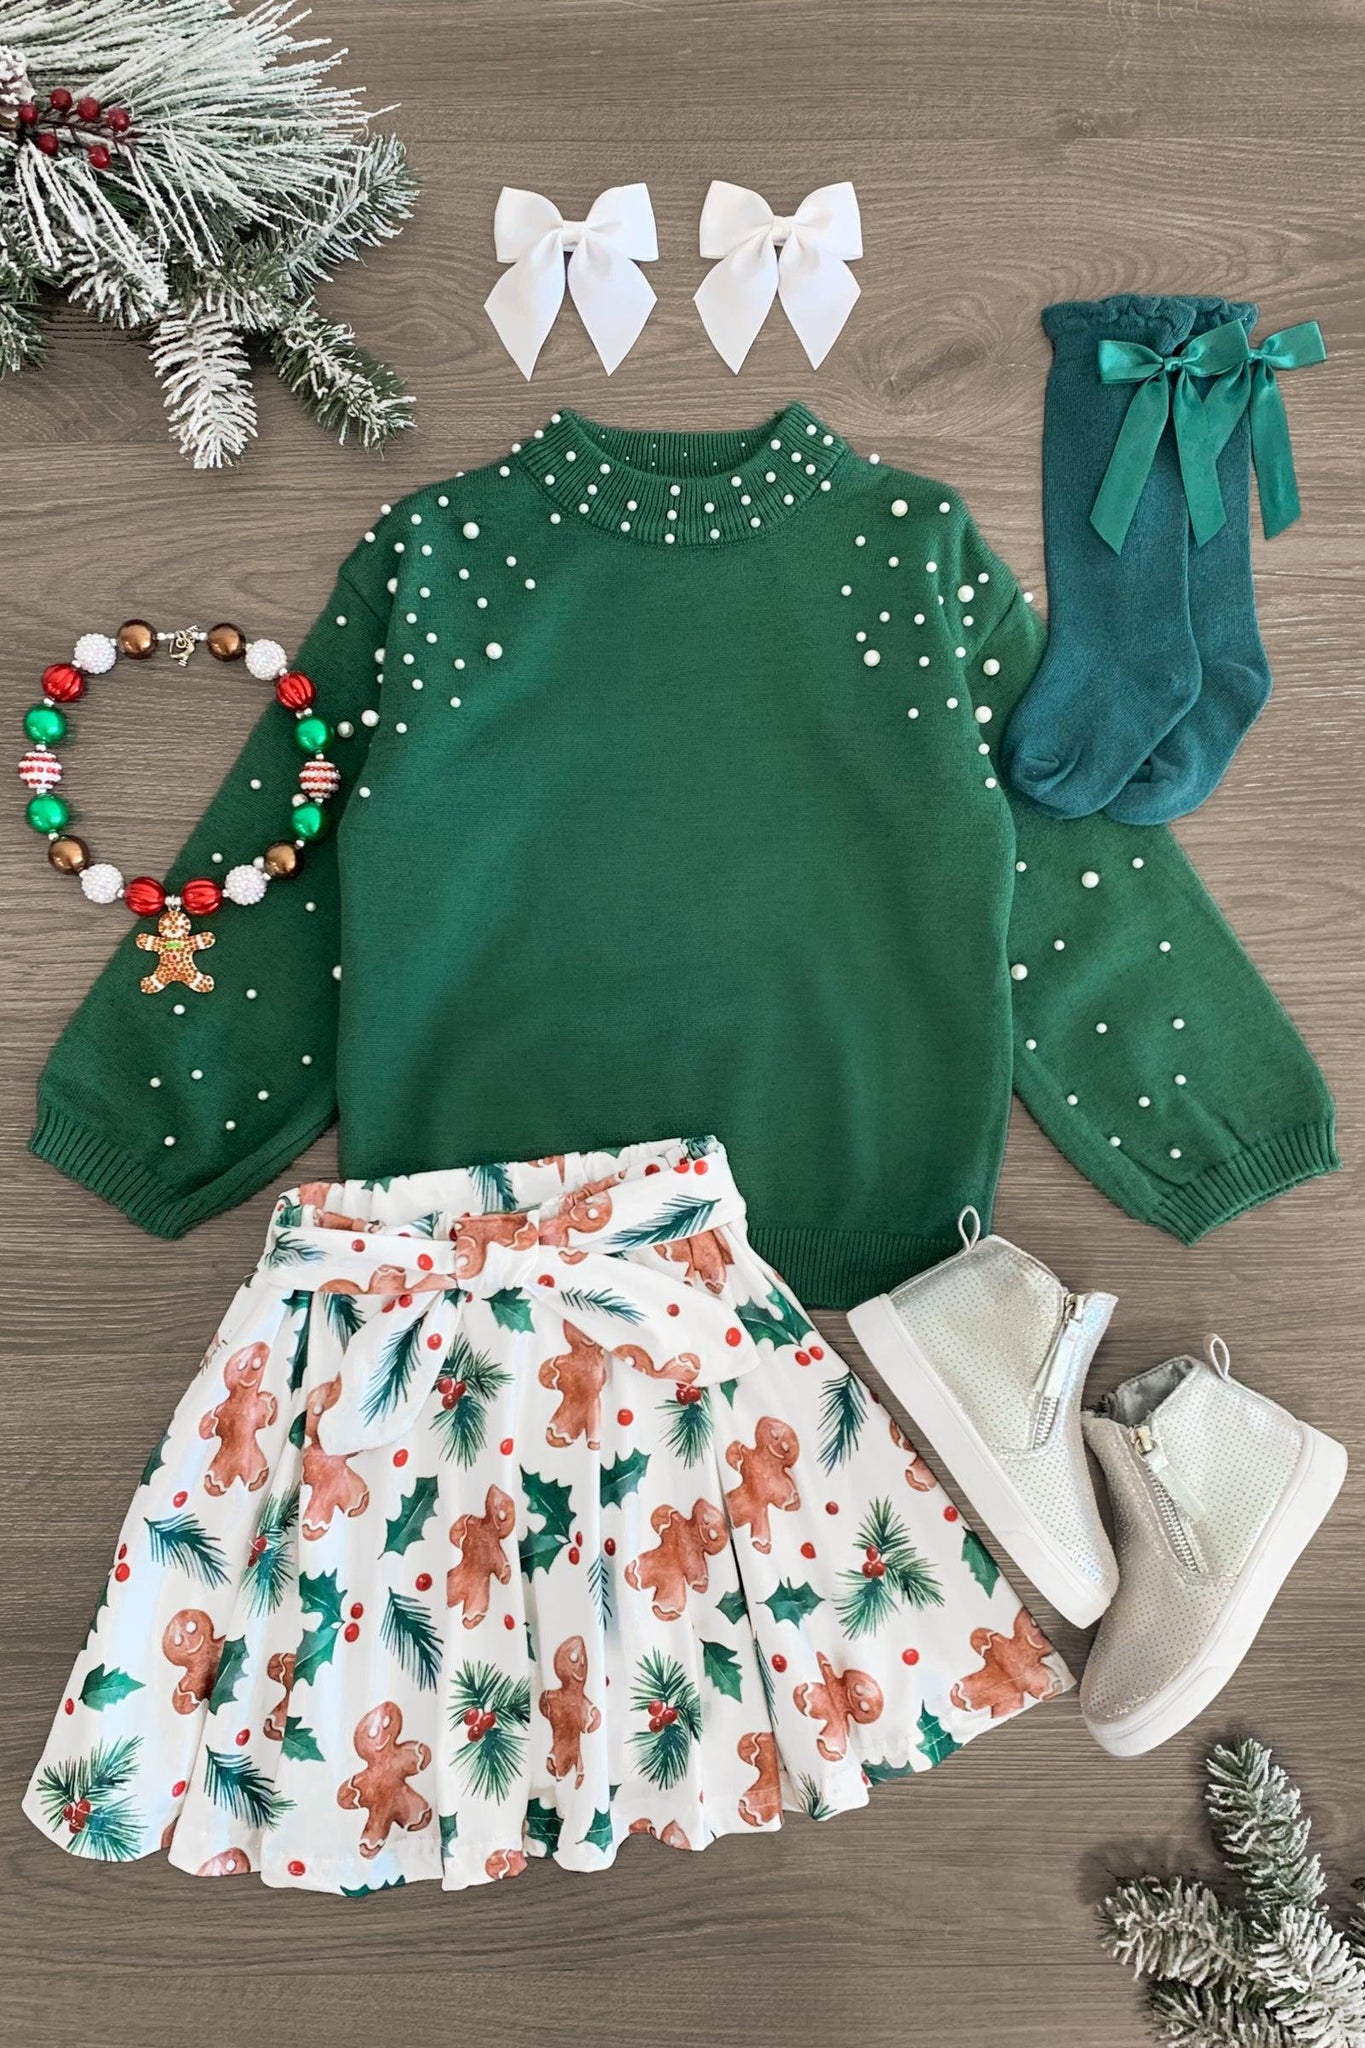 Kids Christmas Clothing & Outfits